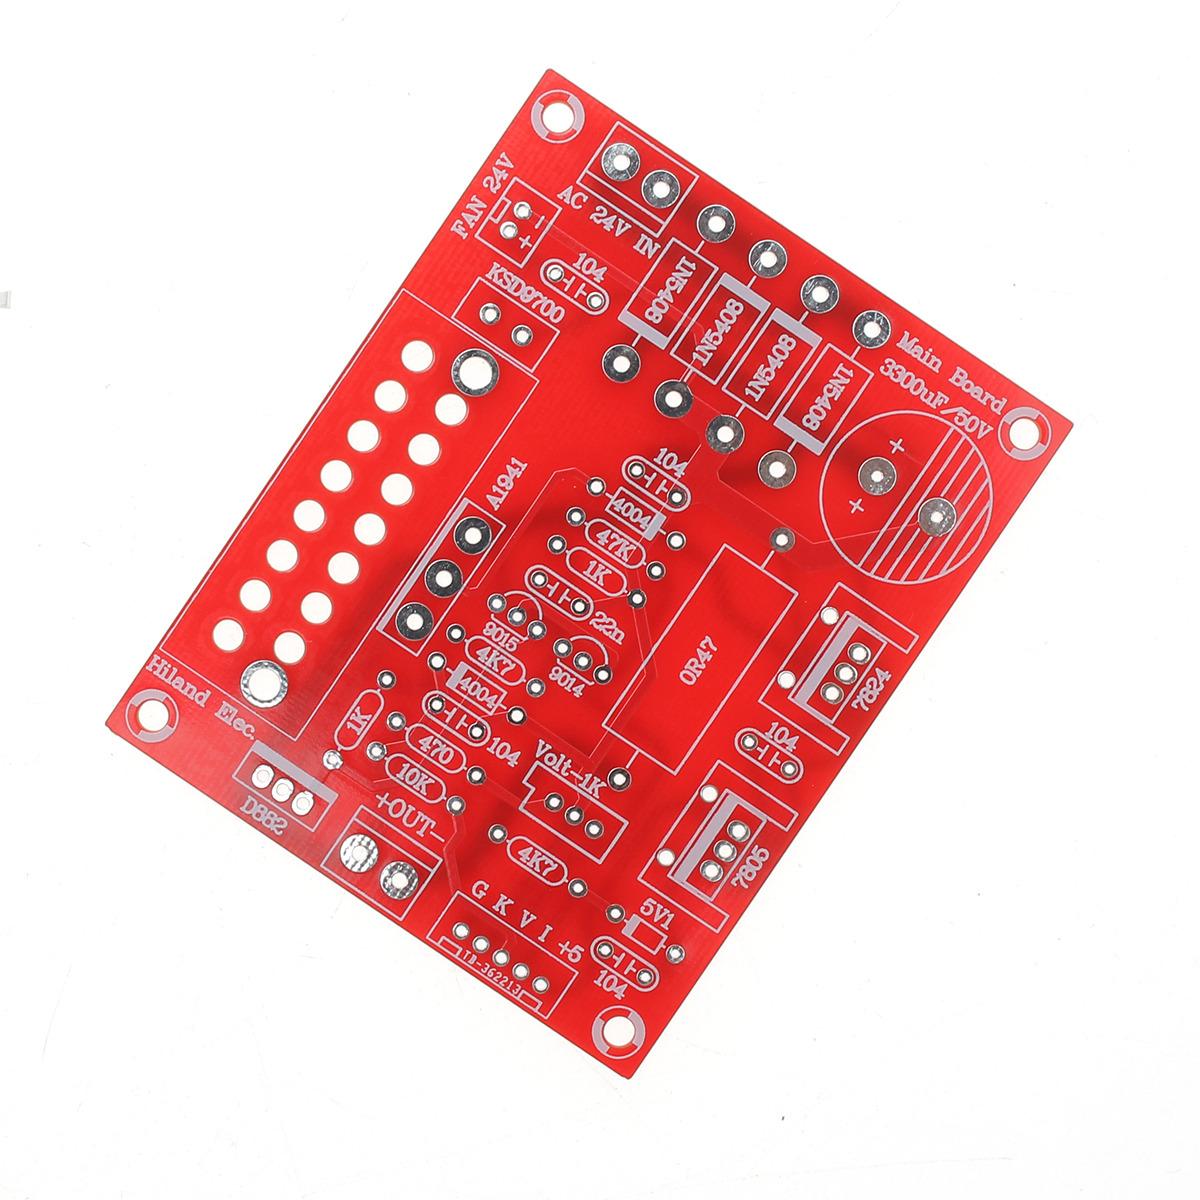 0-28V-001-2A-Adjustable-DC-Regulated-Power-Supply-Module-DIY-Kit-Short-Circuit-Current-Limiting-Prot-1060253